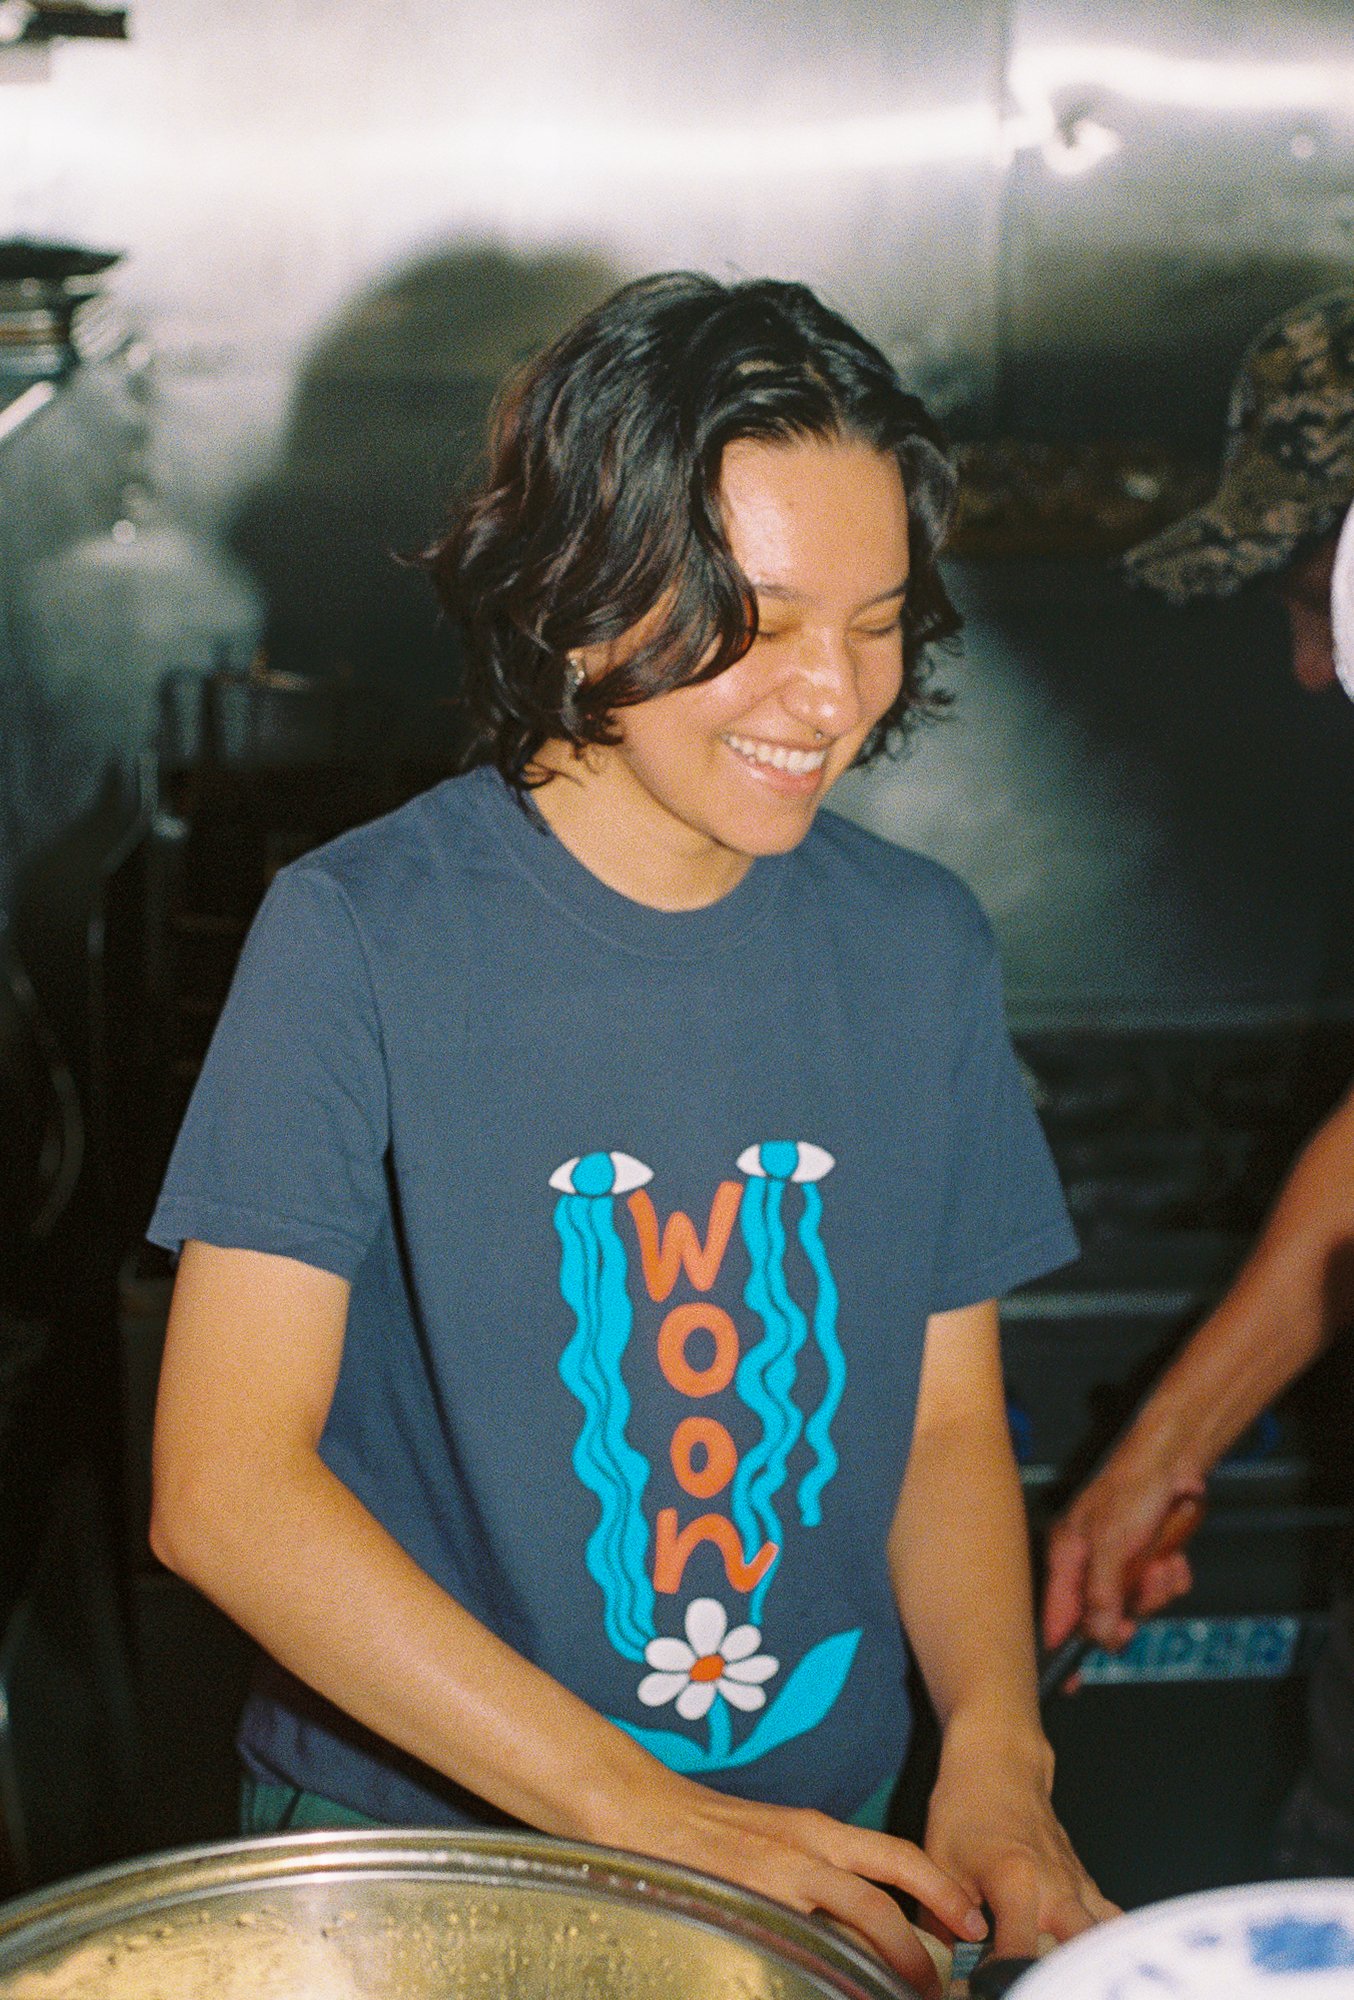 A person wearing a faded navy t shirt